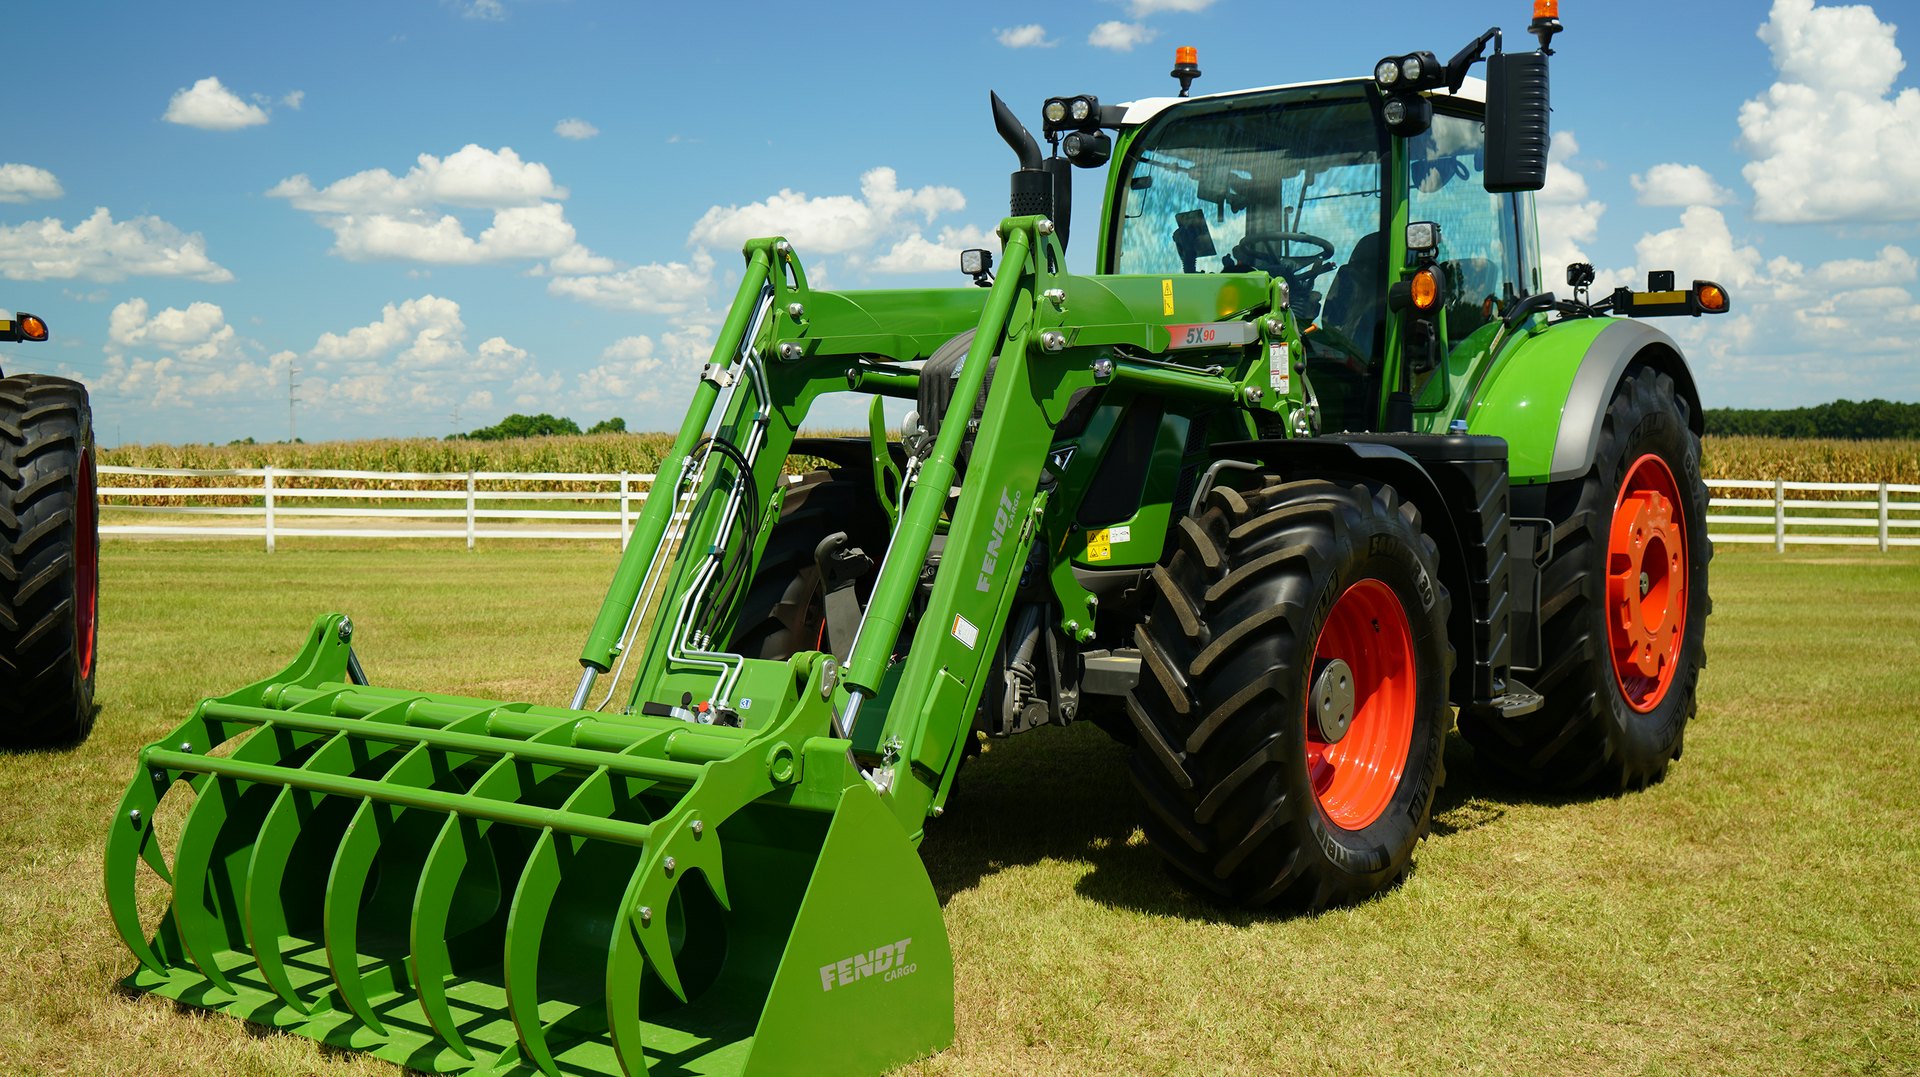 AGCO Debuts FendtONE Operator Interface on Next Generation Fendt 700 Series  Tractors